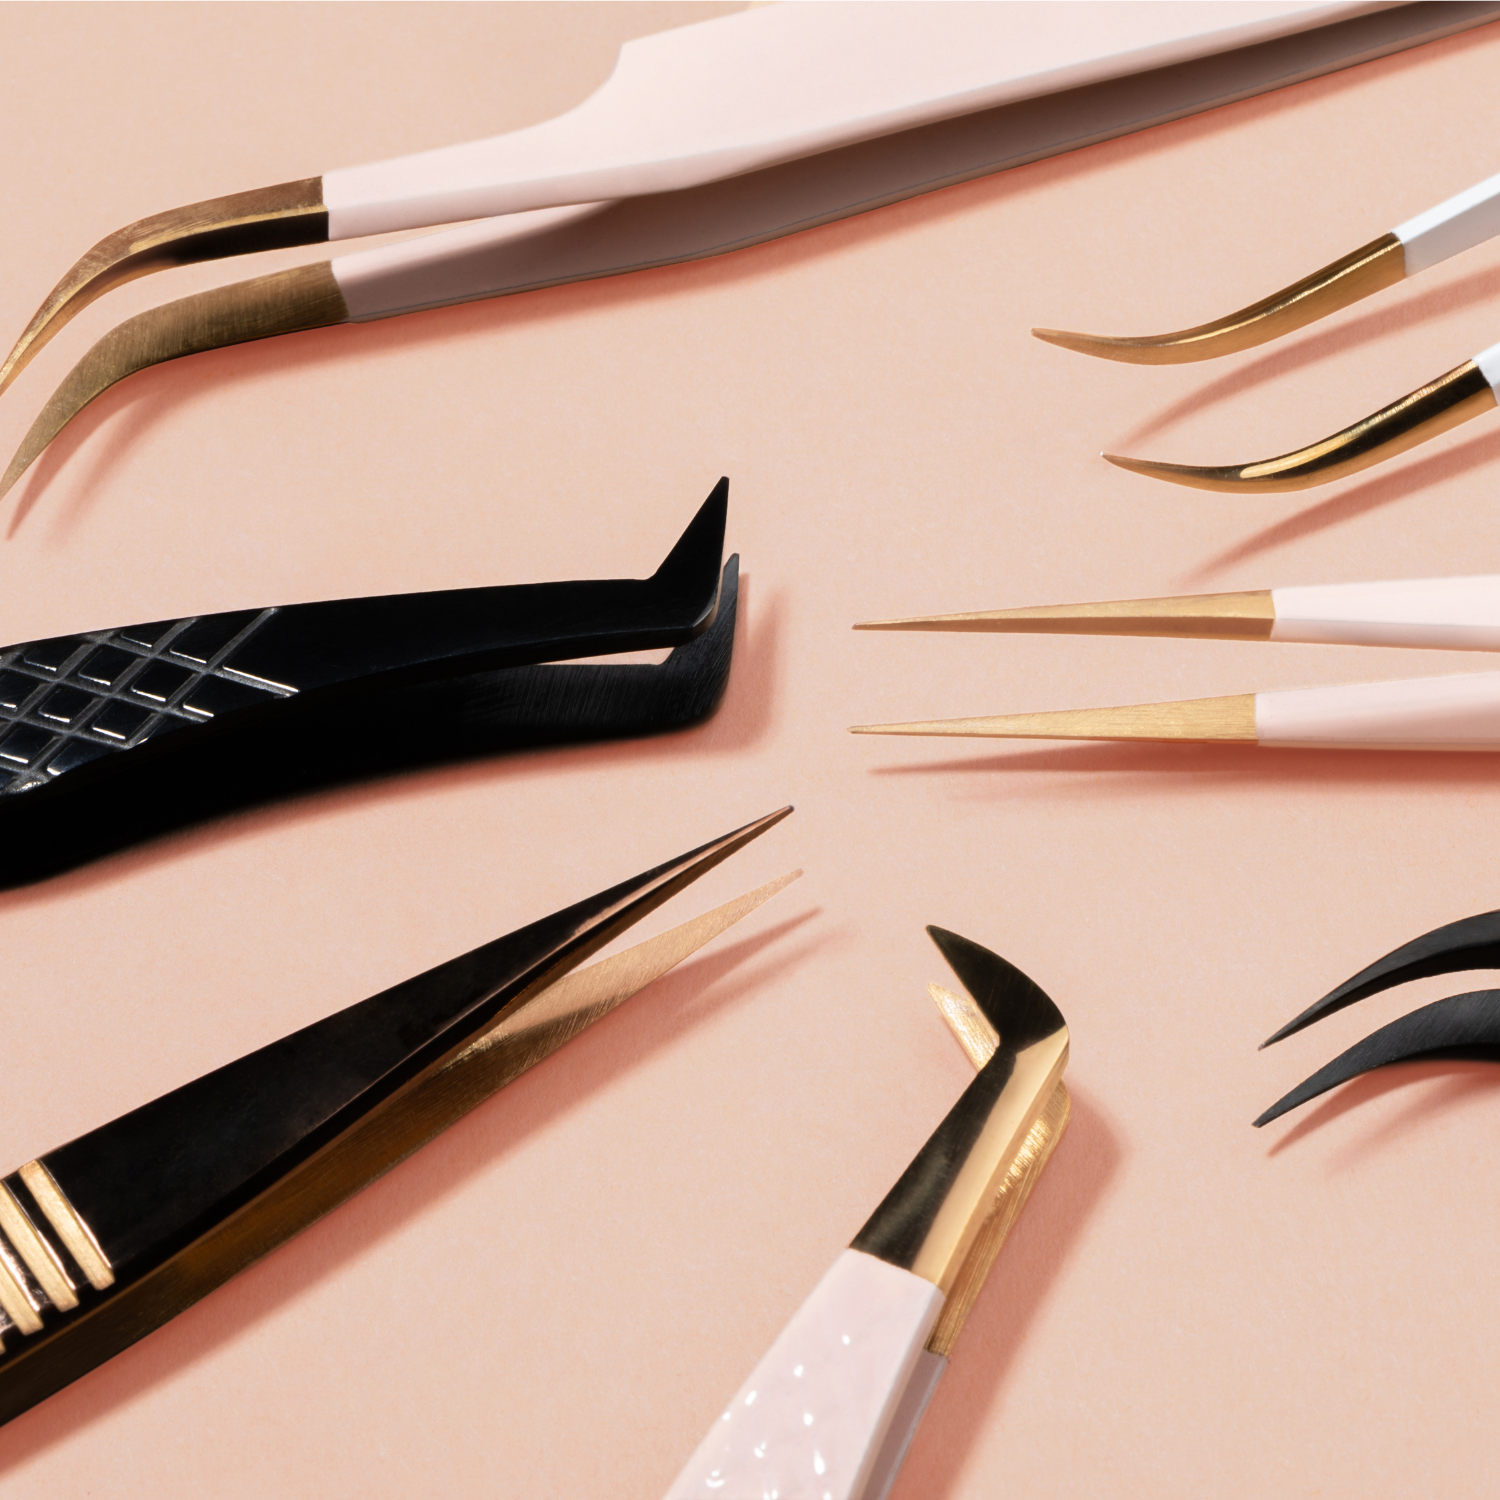 Precision tweezers for flawless eyelash extensions.